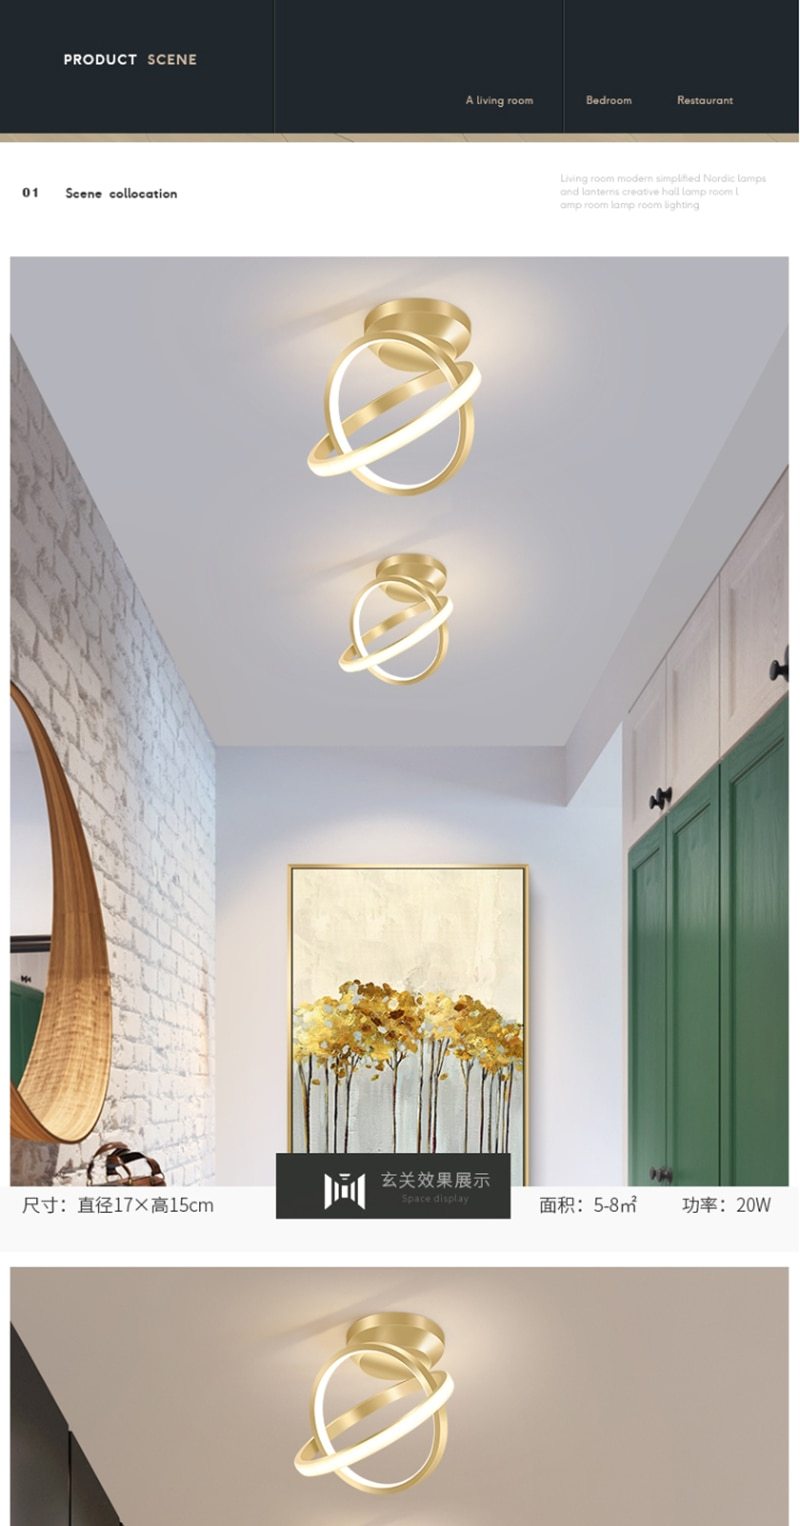 Lalit - Multi Disc Ceiling Light - Nordic Side - 05-21, feed-cl1-lights-over-80-dollars